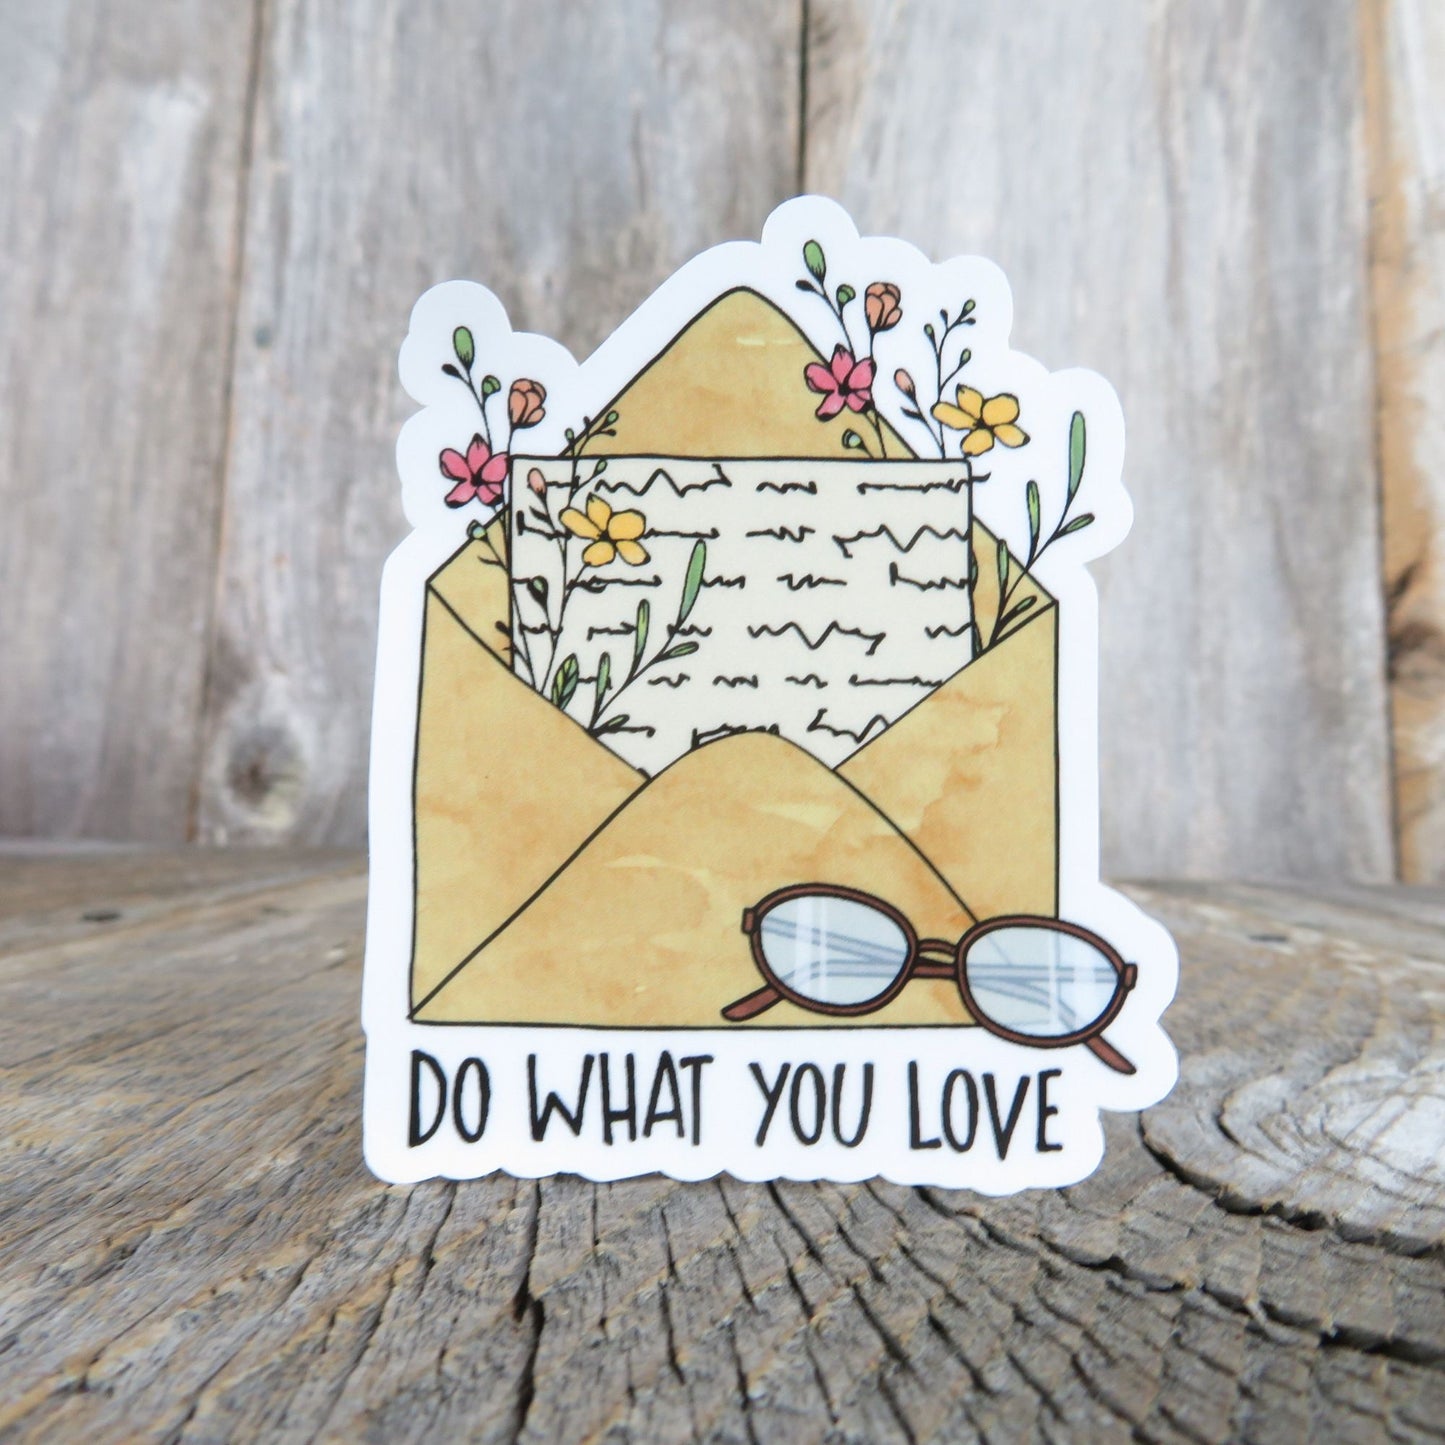 Do What You Love Sticker Book Inspirational Positive Affirmation Waterproof Letter Envelope and Reading Glasses